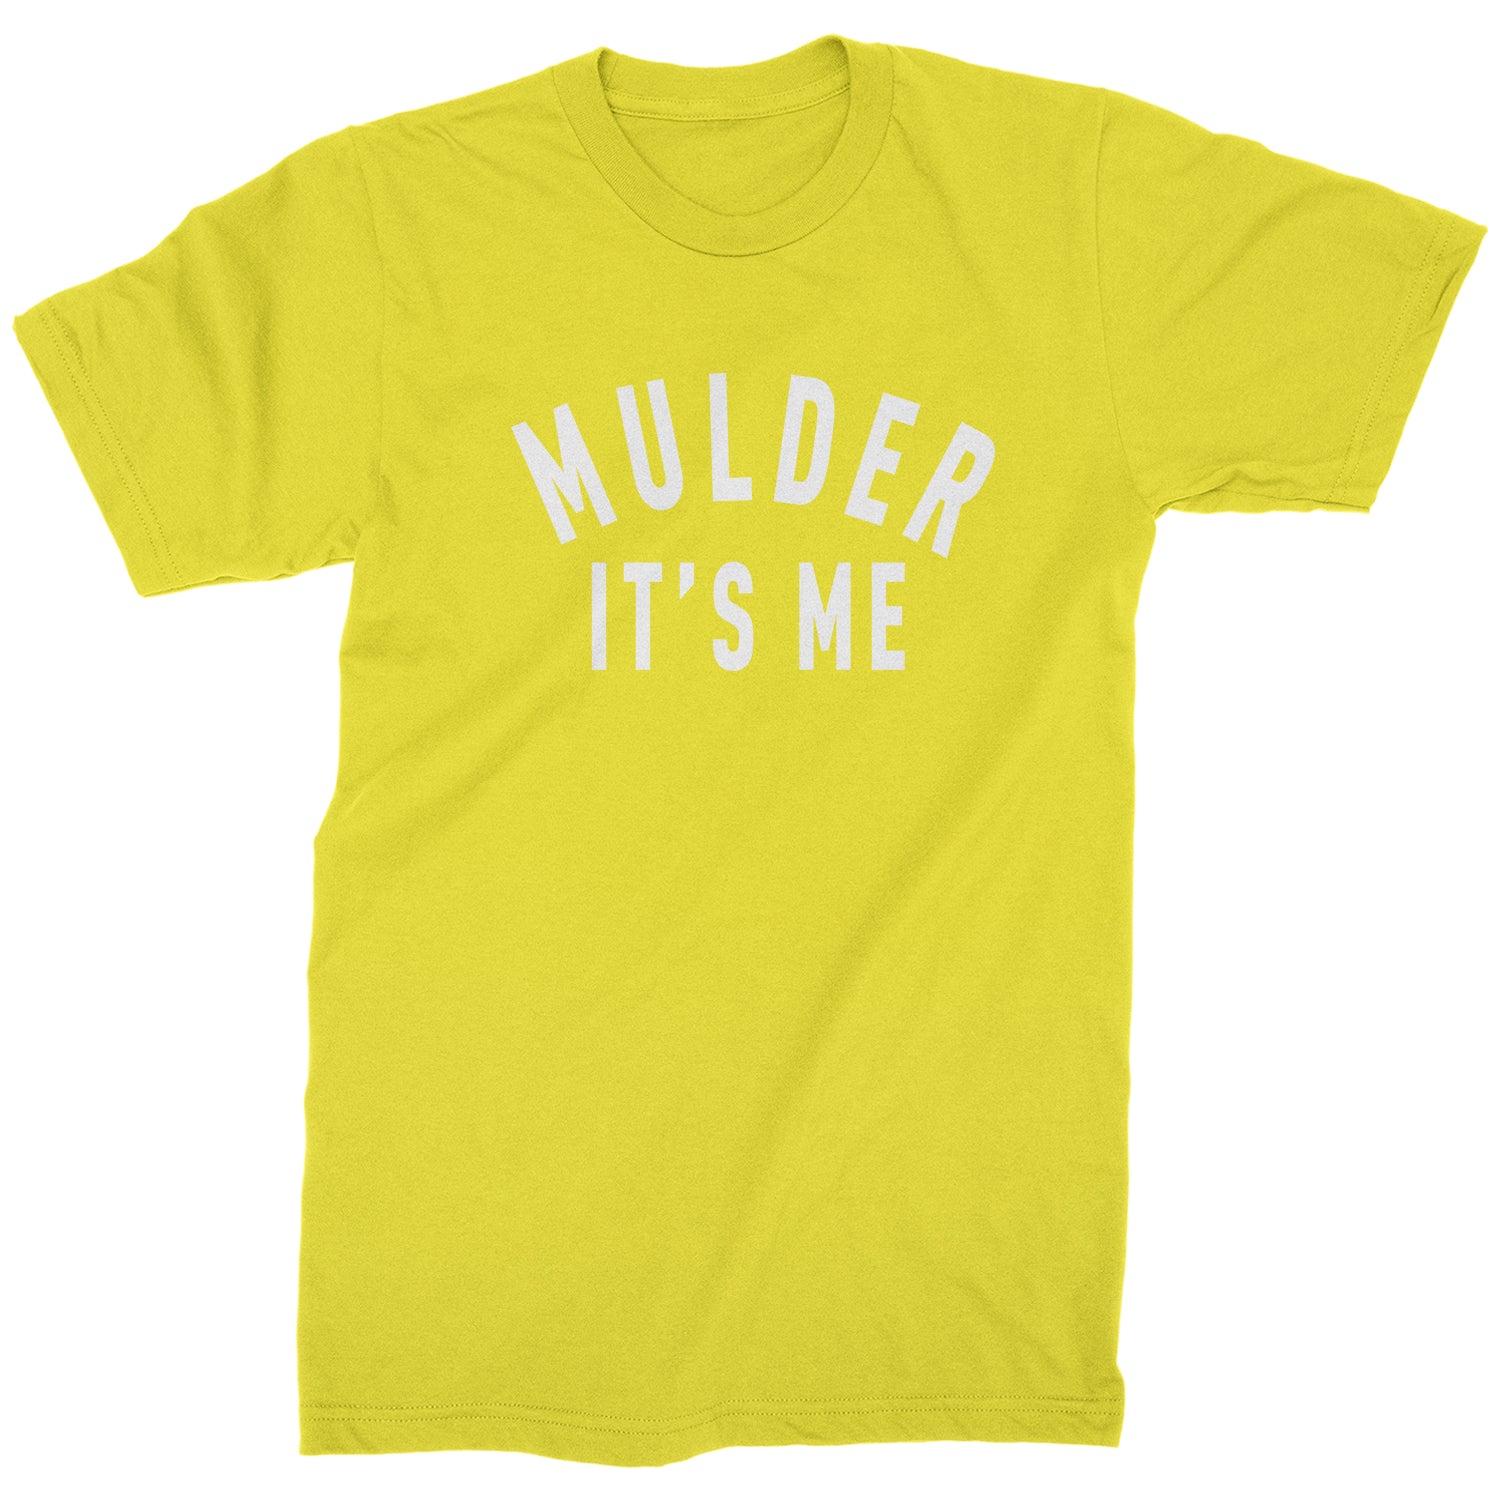 Mulder, It's Me Mens T-shirt 51, area, believe, files, is, mulder, out, scully, the, there, truth, x, xfiles by Expression Tees